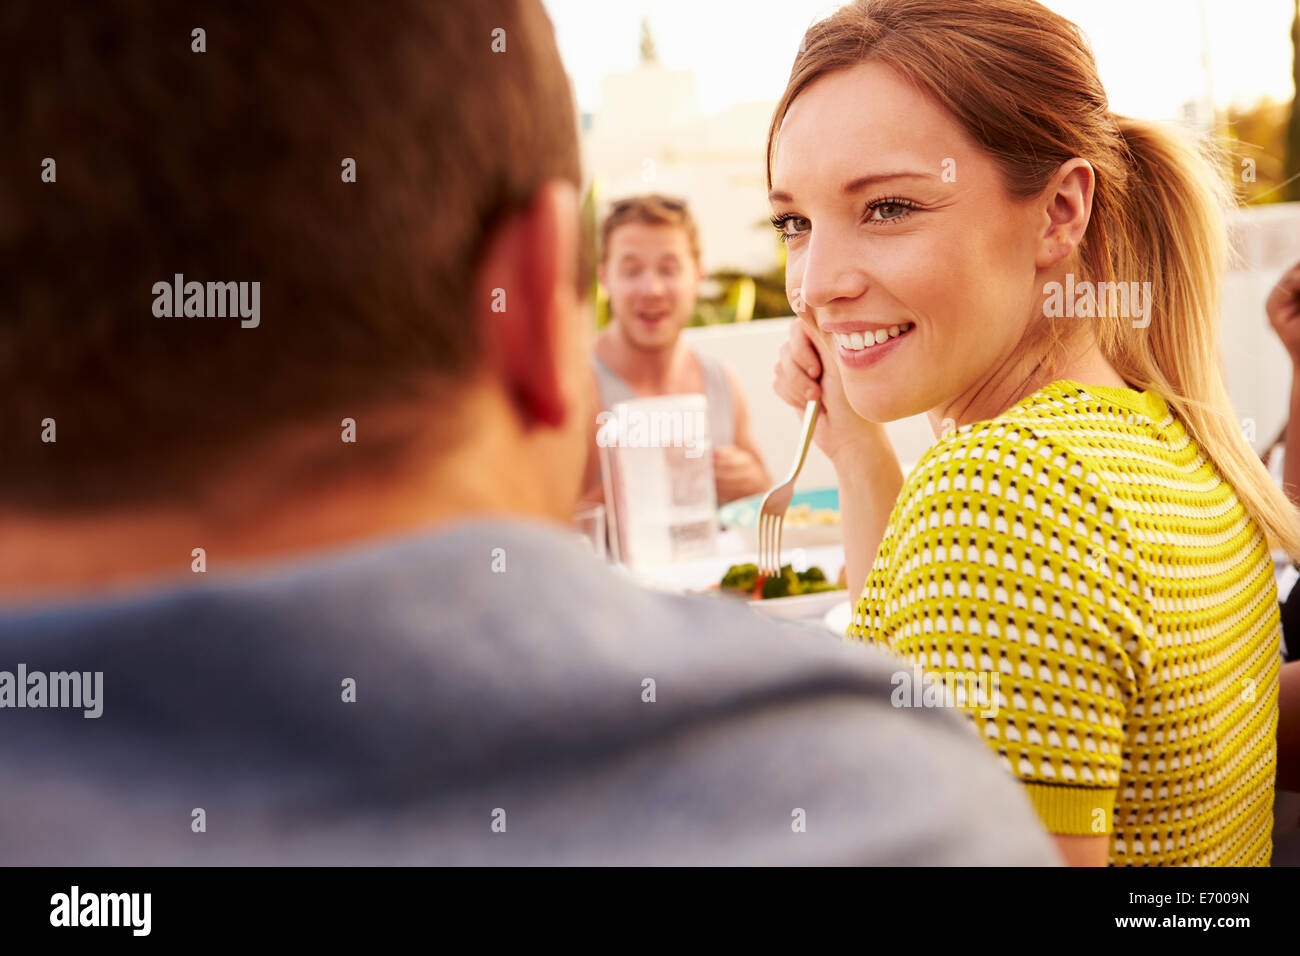 Couple Enjoying Outdoor Summer Meal With Friends Stock Photo